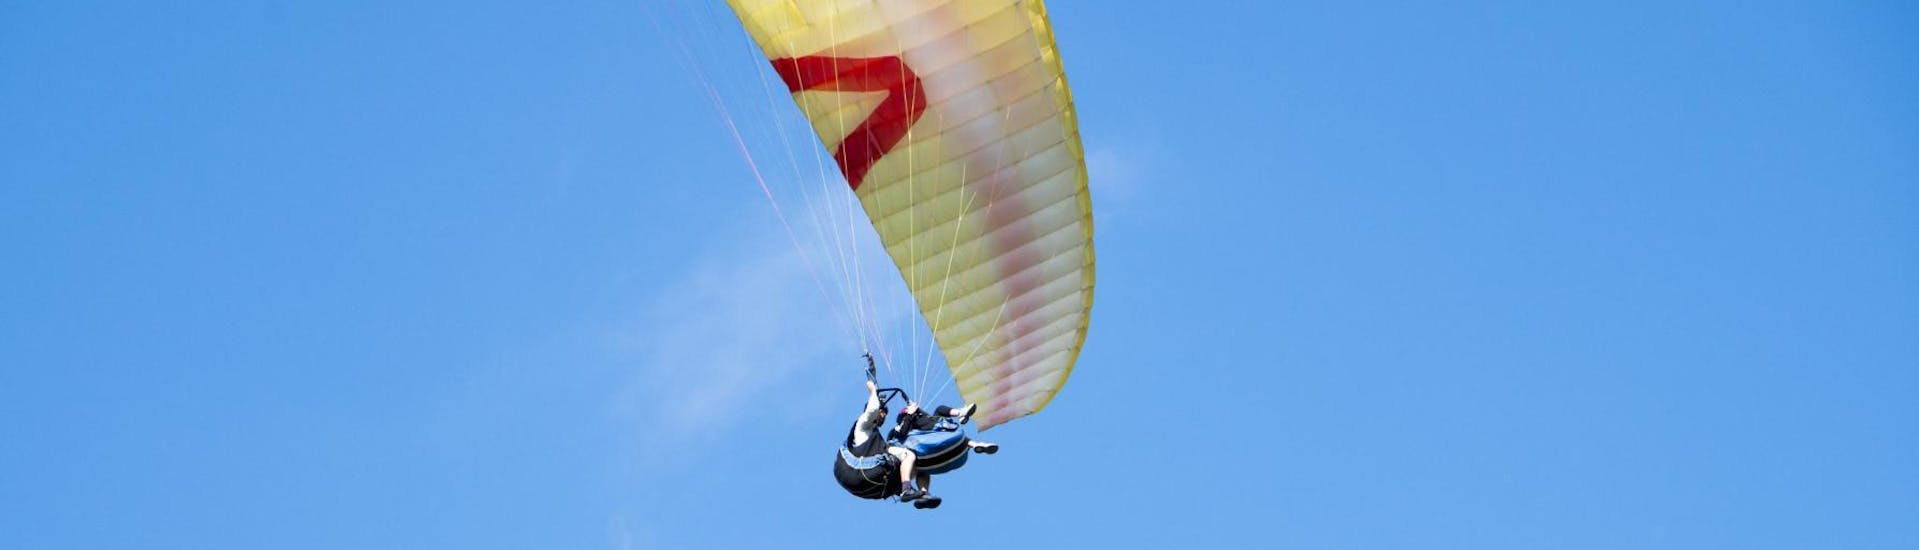 Tandem Paragliding from Krvavec Mountain with Sky Riders Paragliding Croatia - Hero image